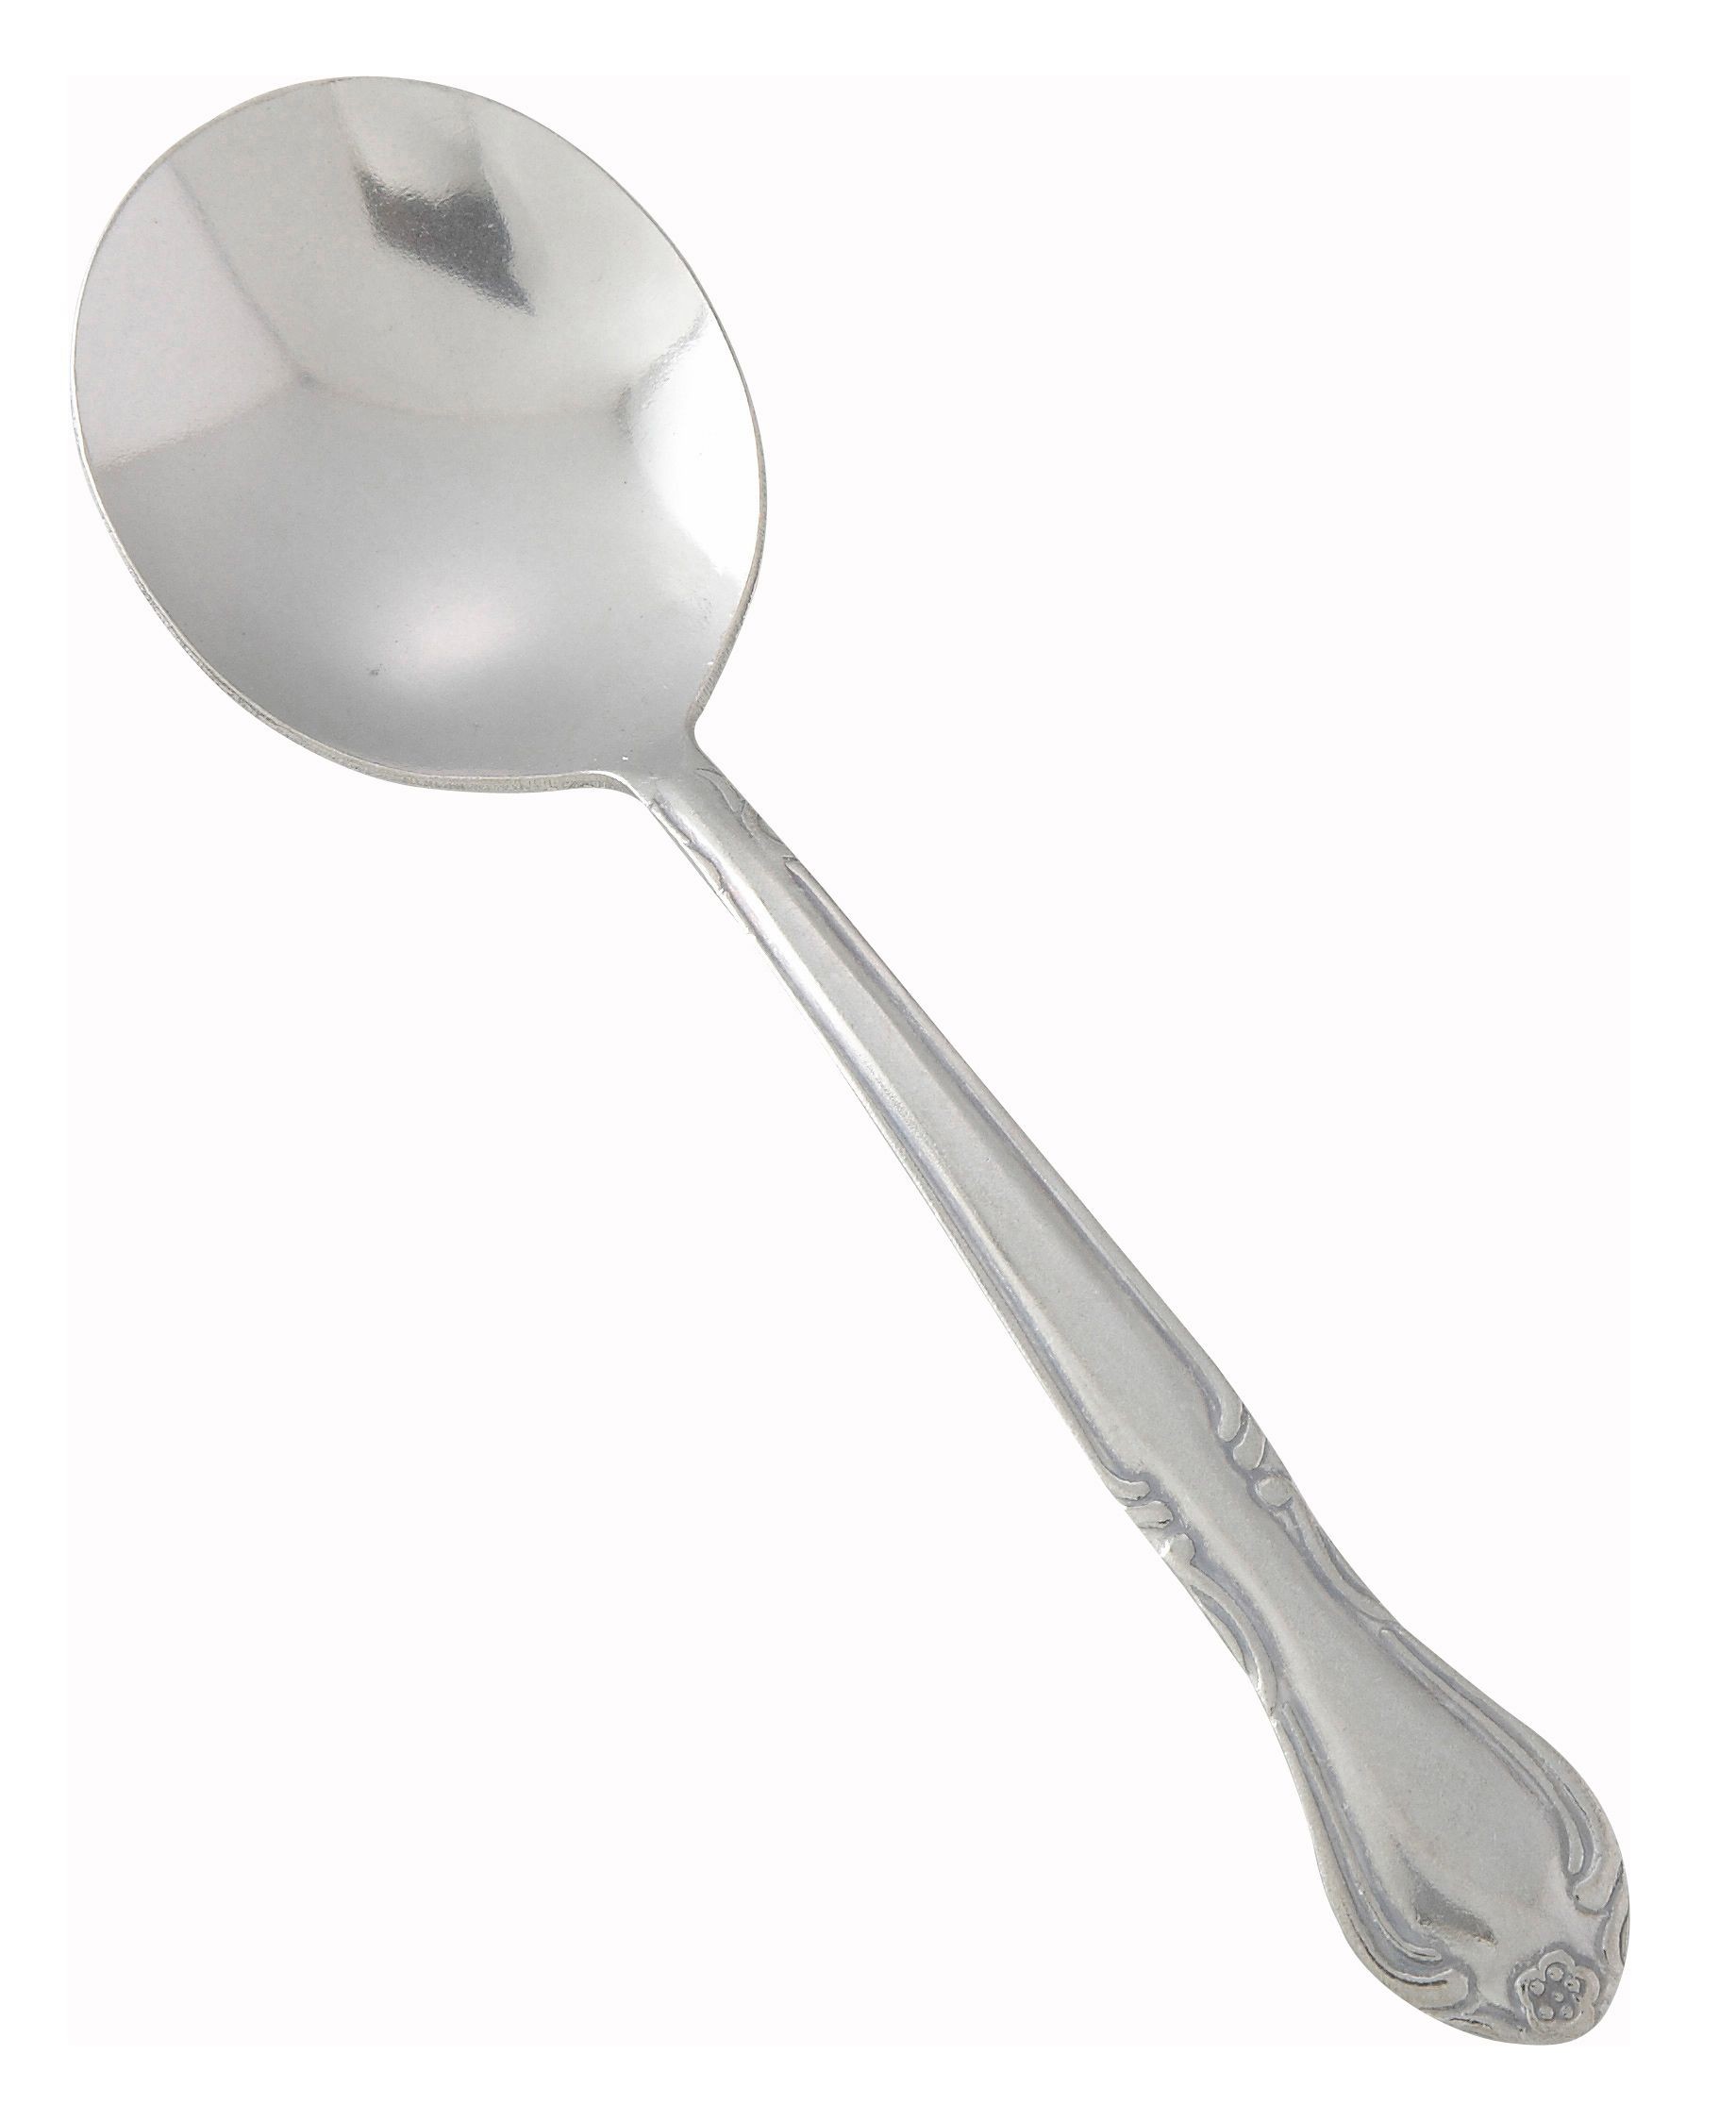 Winco 0004-04 Elegance Heavy Weight Vibro Finish Stainless Steel Bouillon Spoon (12/Pack)